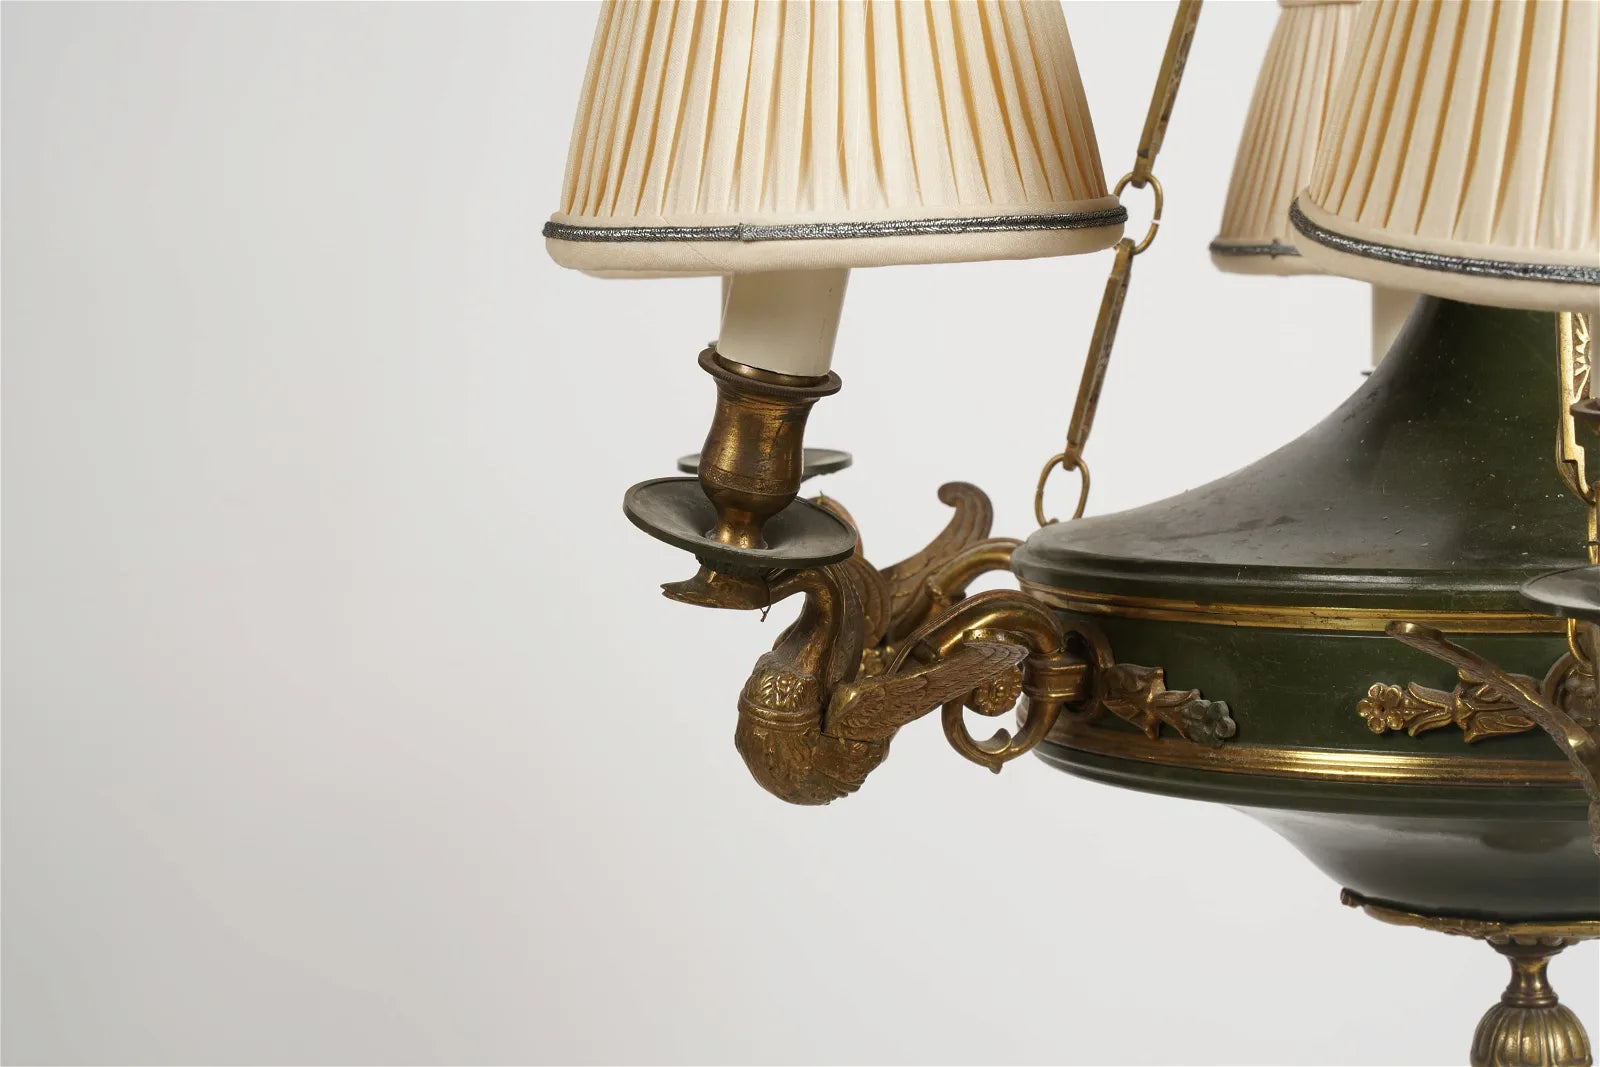 AL1-070: Early 20th Century French Empire Style Gilt Bronze & Patinated Metal 6 Light Chandelier